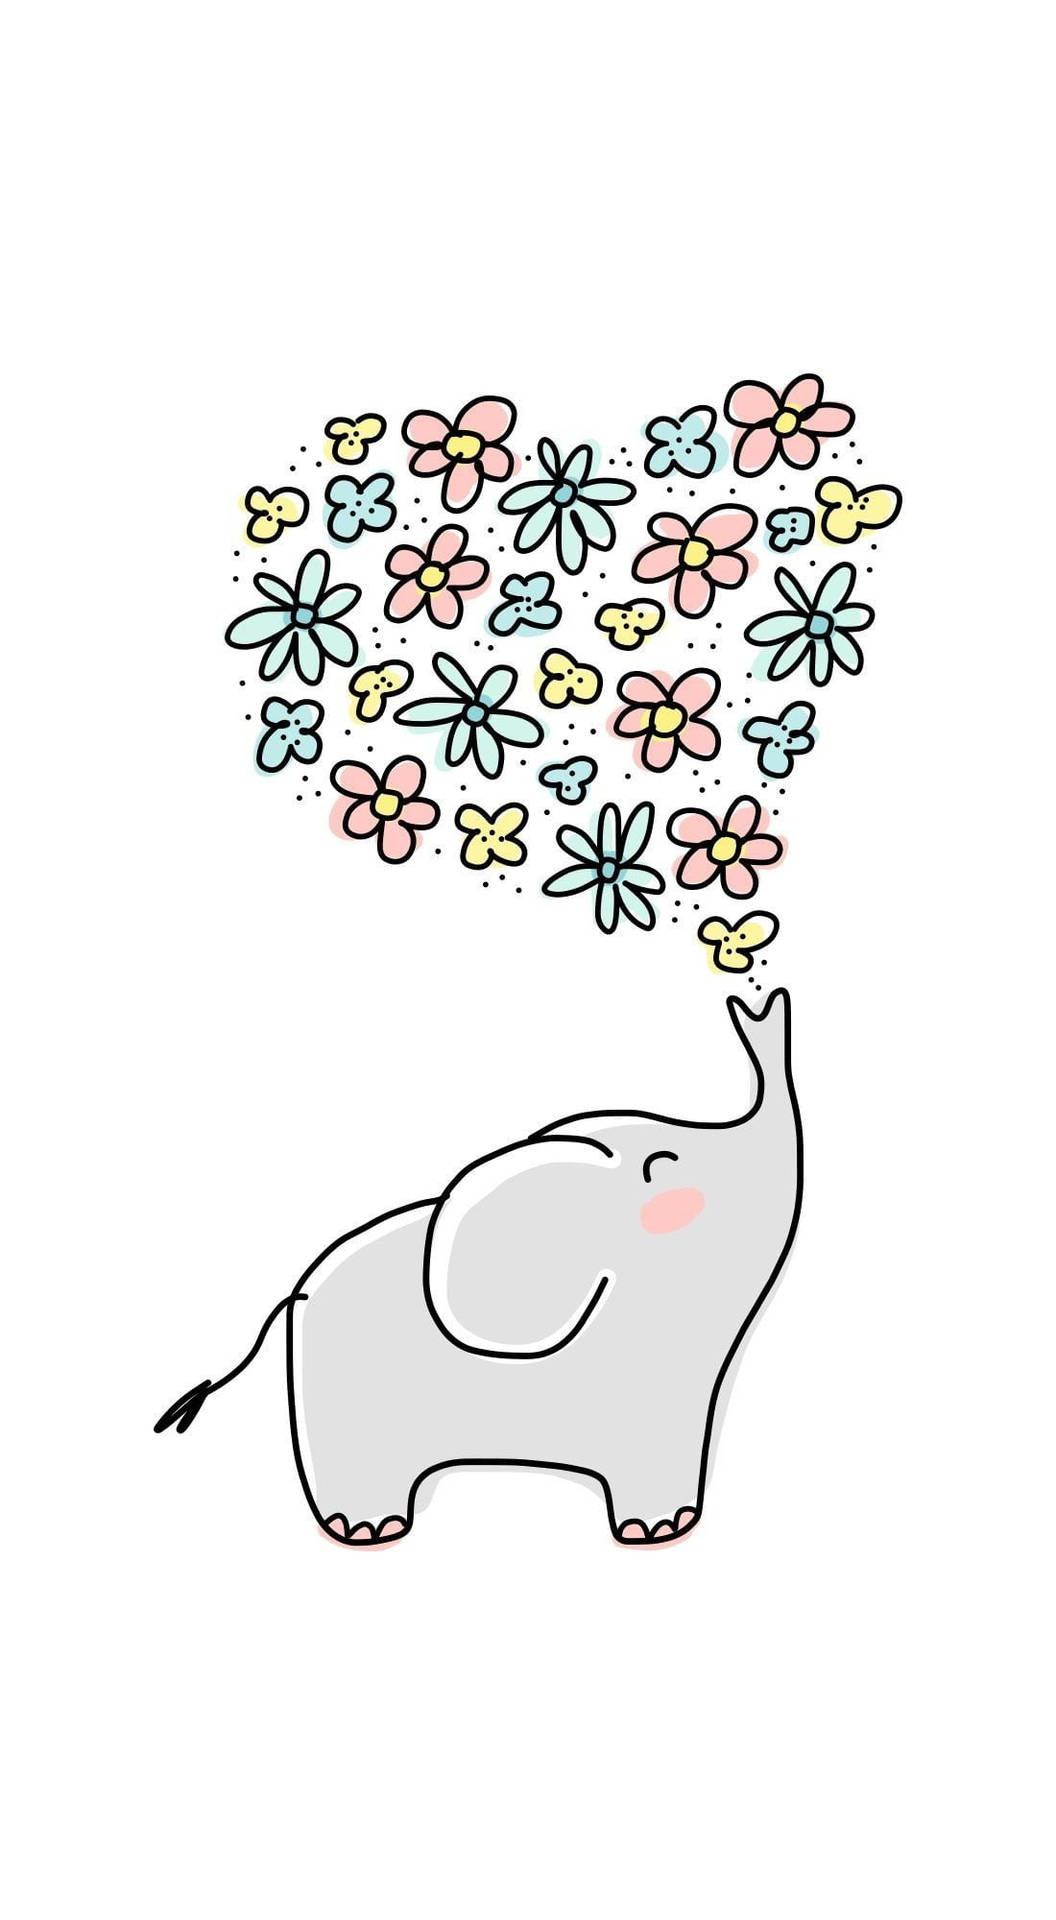 Download Elephant Spraying Flowers Aesthetic Sketches Wallpaper